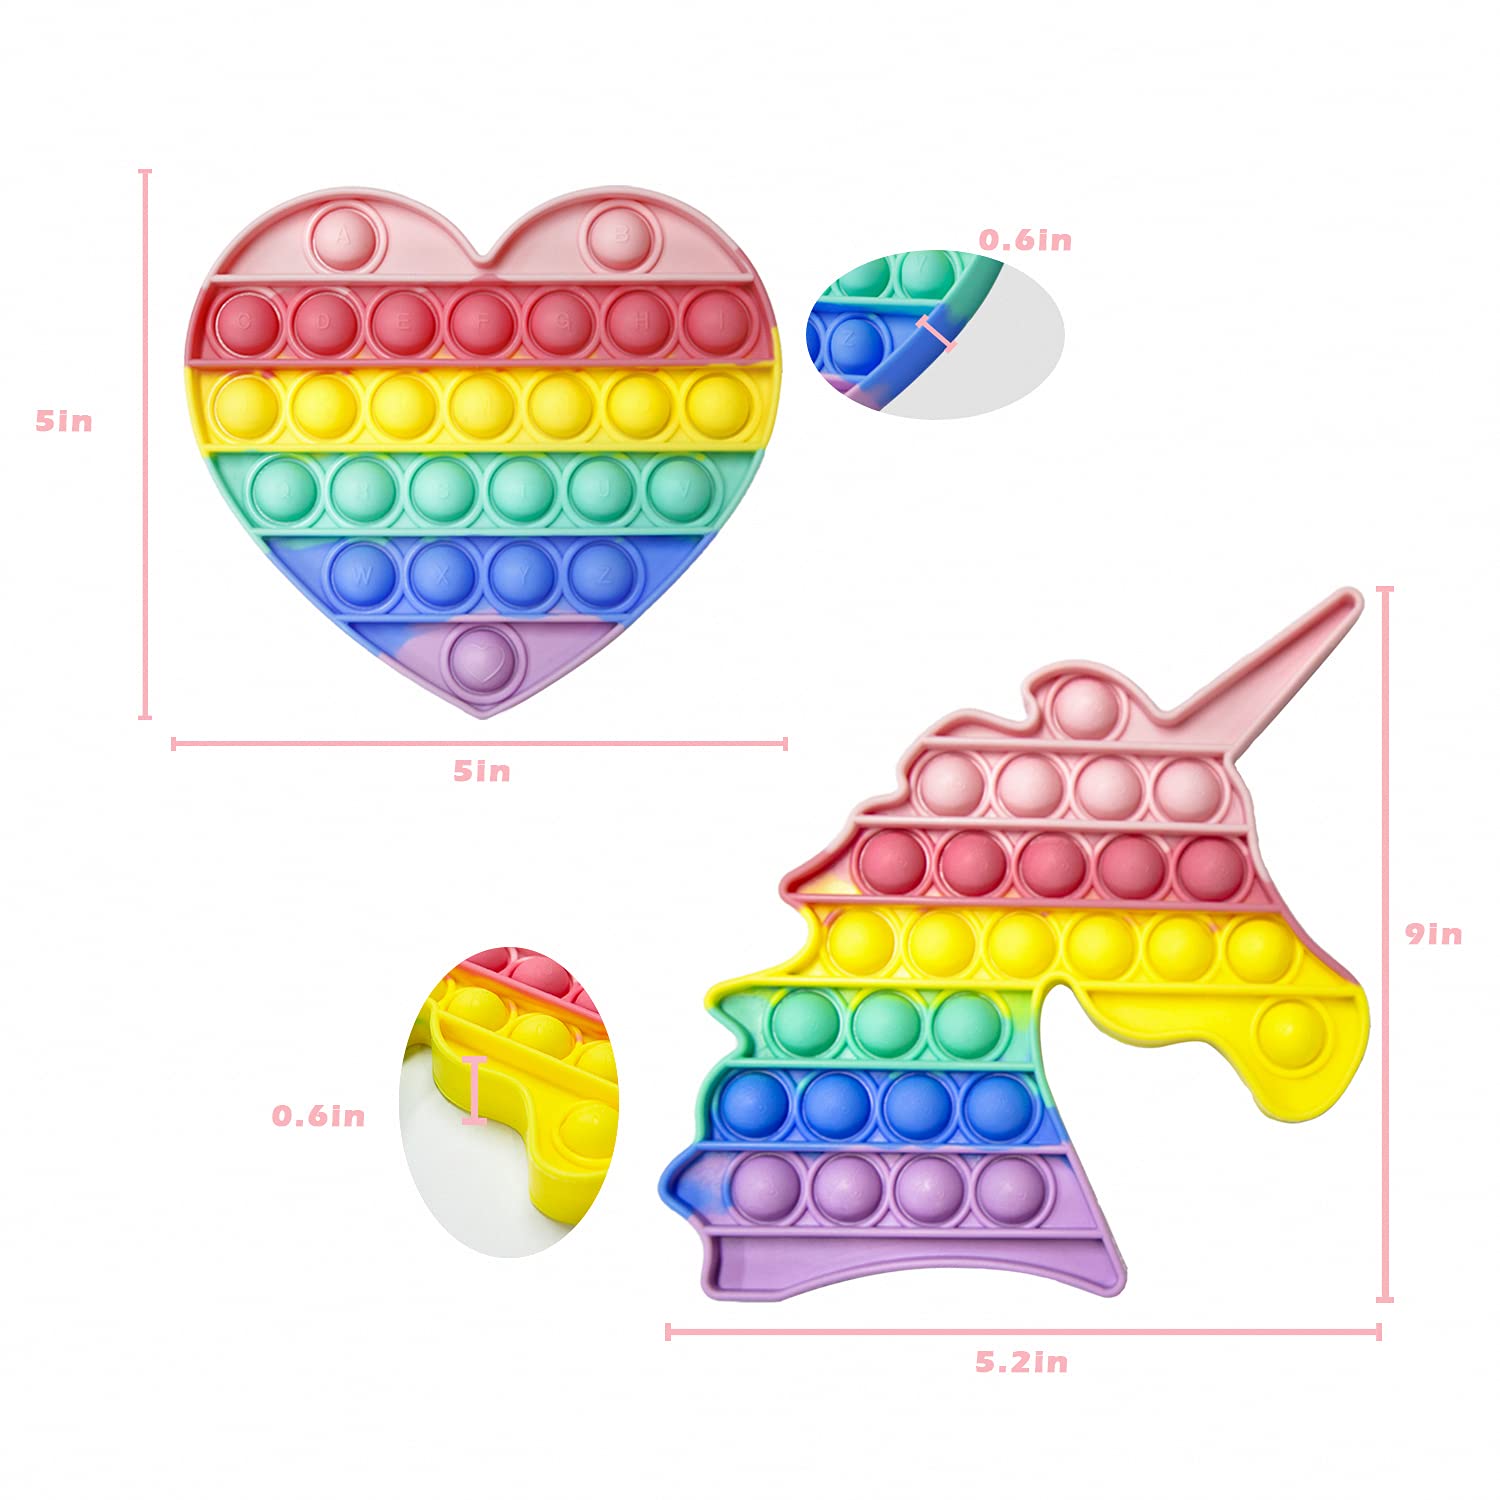 Teamgee Rainbow Unicorn Heart Pop Fidget Toy, Silicone Push Sensory Pop Stress Bubble Toy Reliever Office School Game Gift for Kids Children Adults 2 Pack (Pink Unicorn Heart)